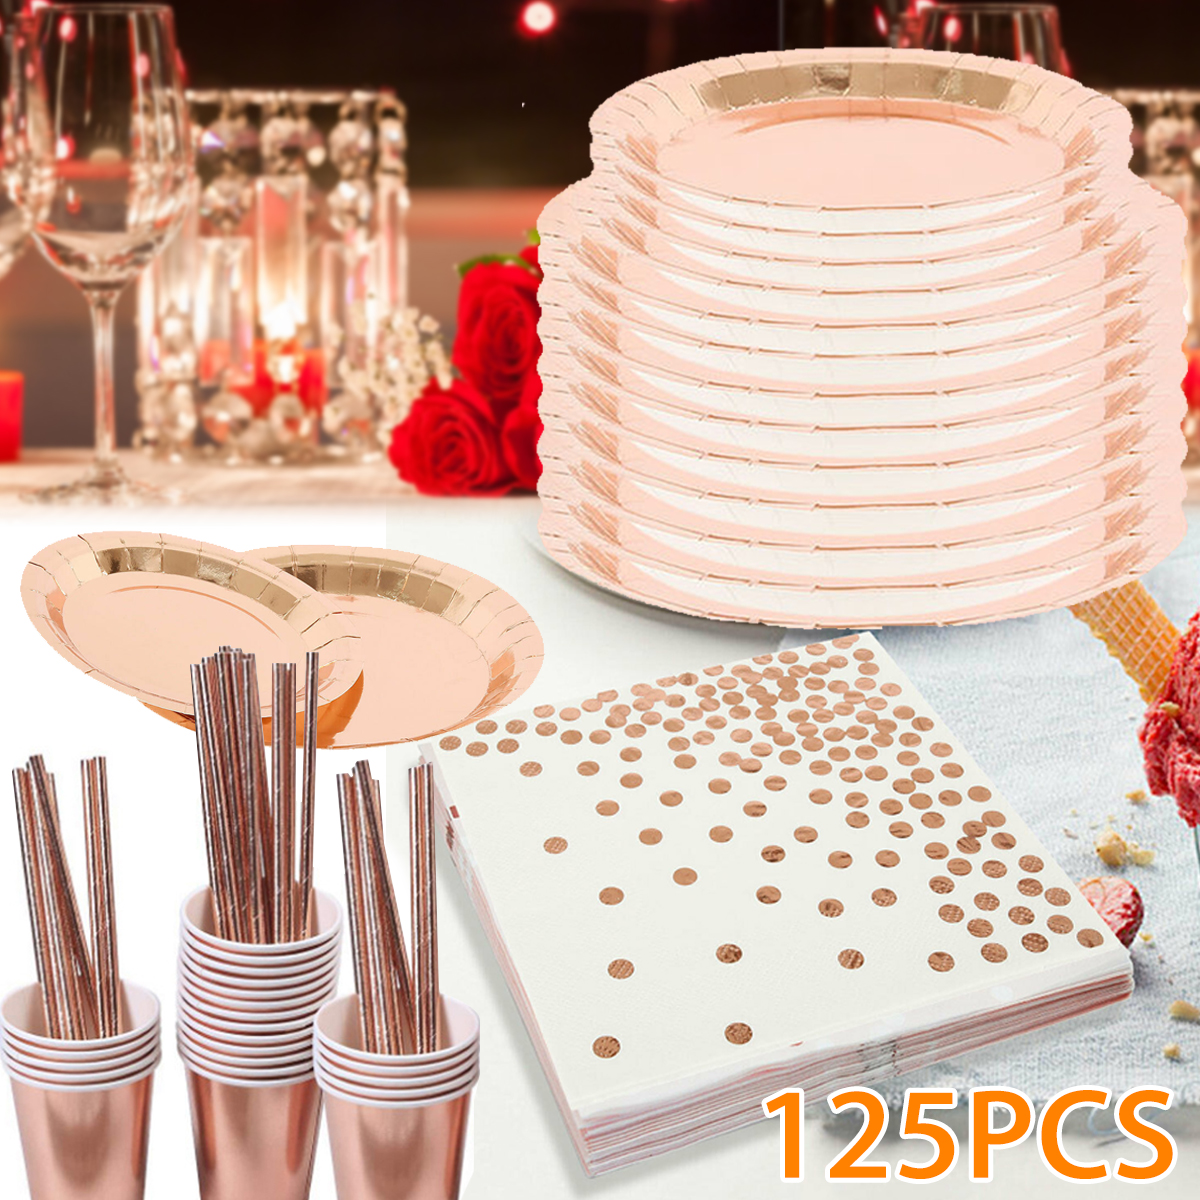 125pcs-Party-Disposable-Tableware-Set-Festival-Paper-Cups-Camping-Fork-Spoon-Rose-Gold-Plates-Straws-1662319-1